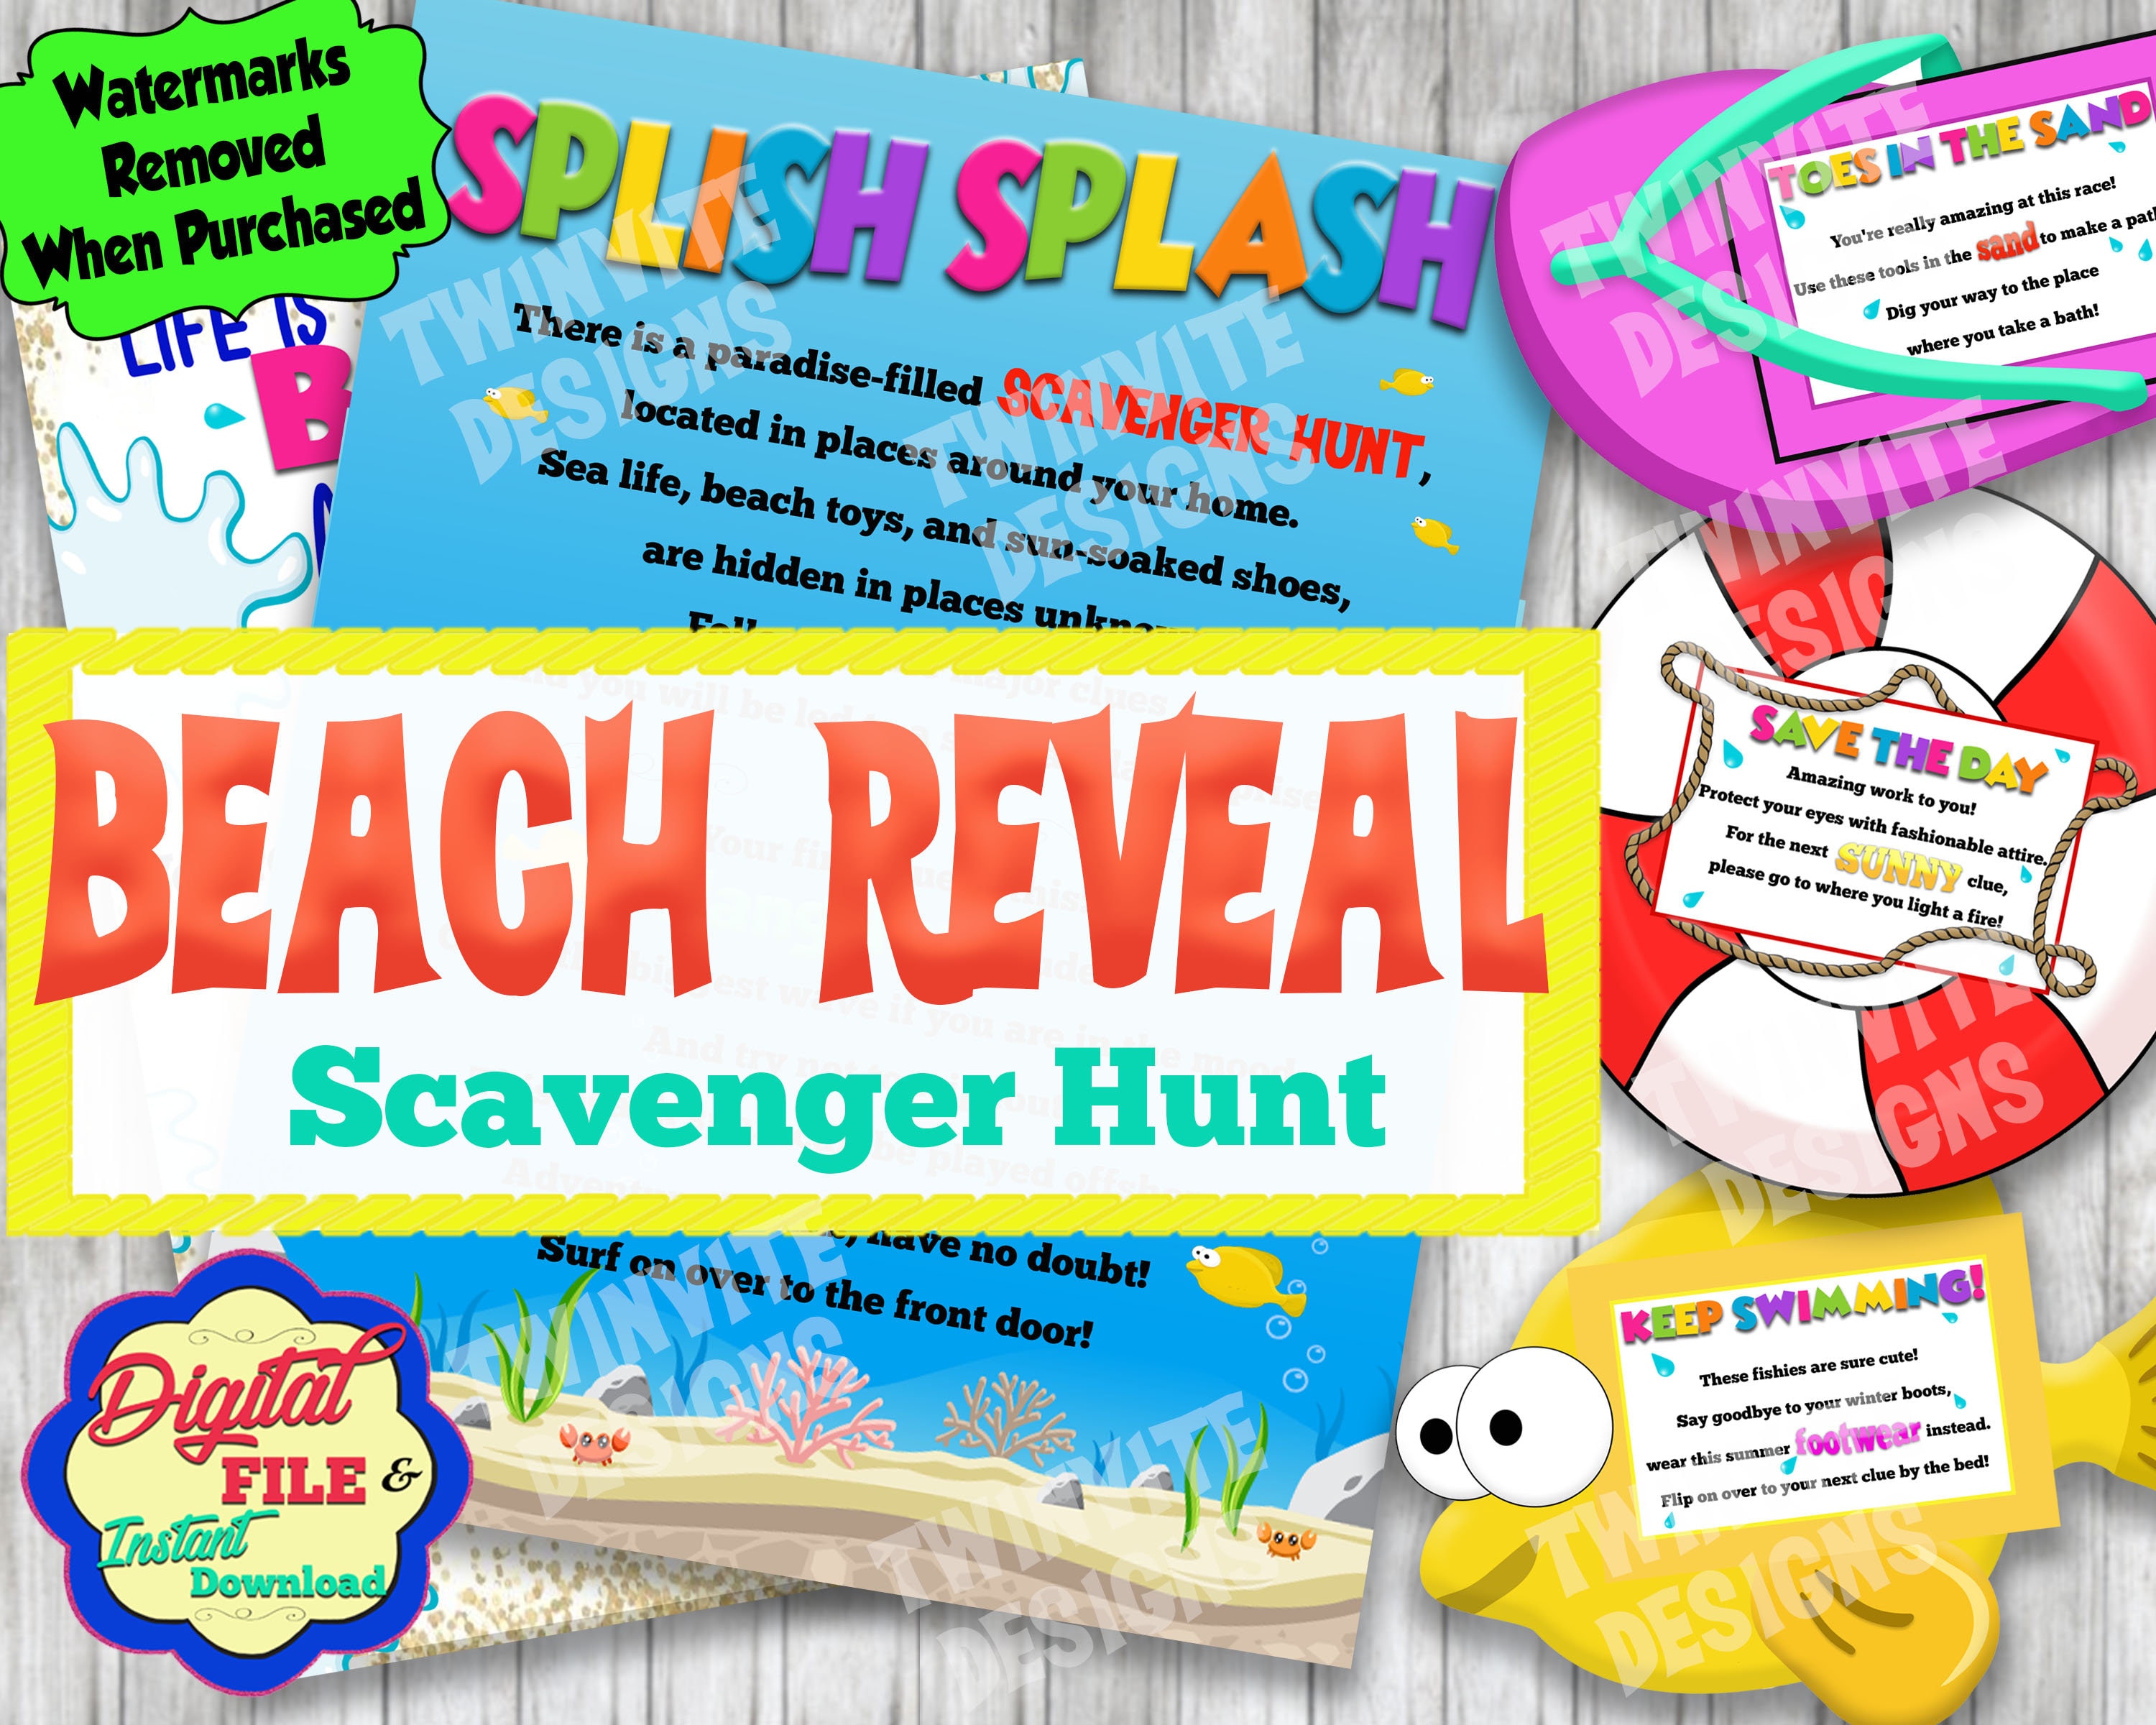 Beach Trip Scavenger Hunt Vacation Reveal Youre Going to picture image